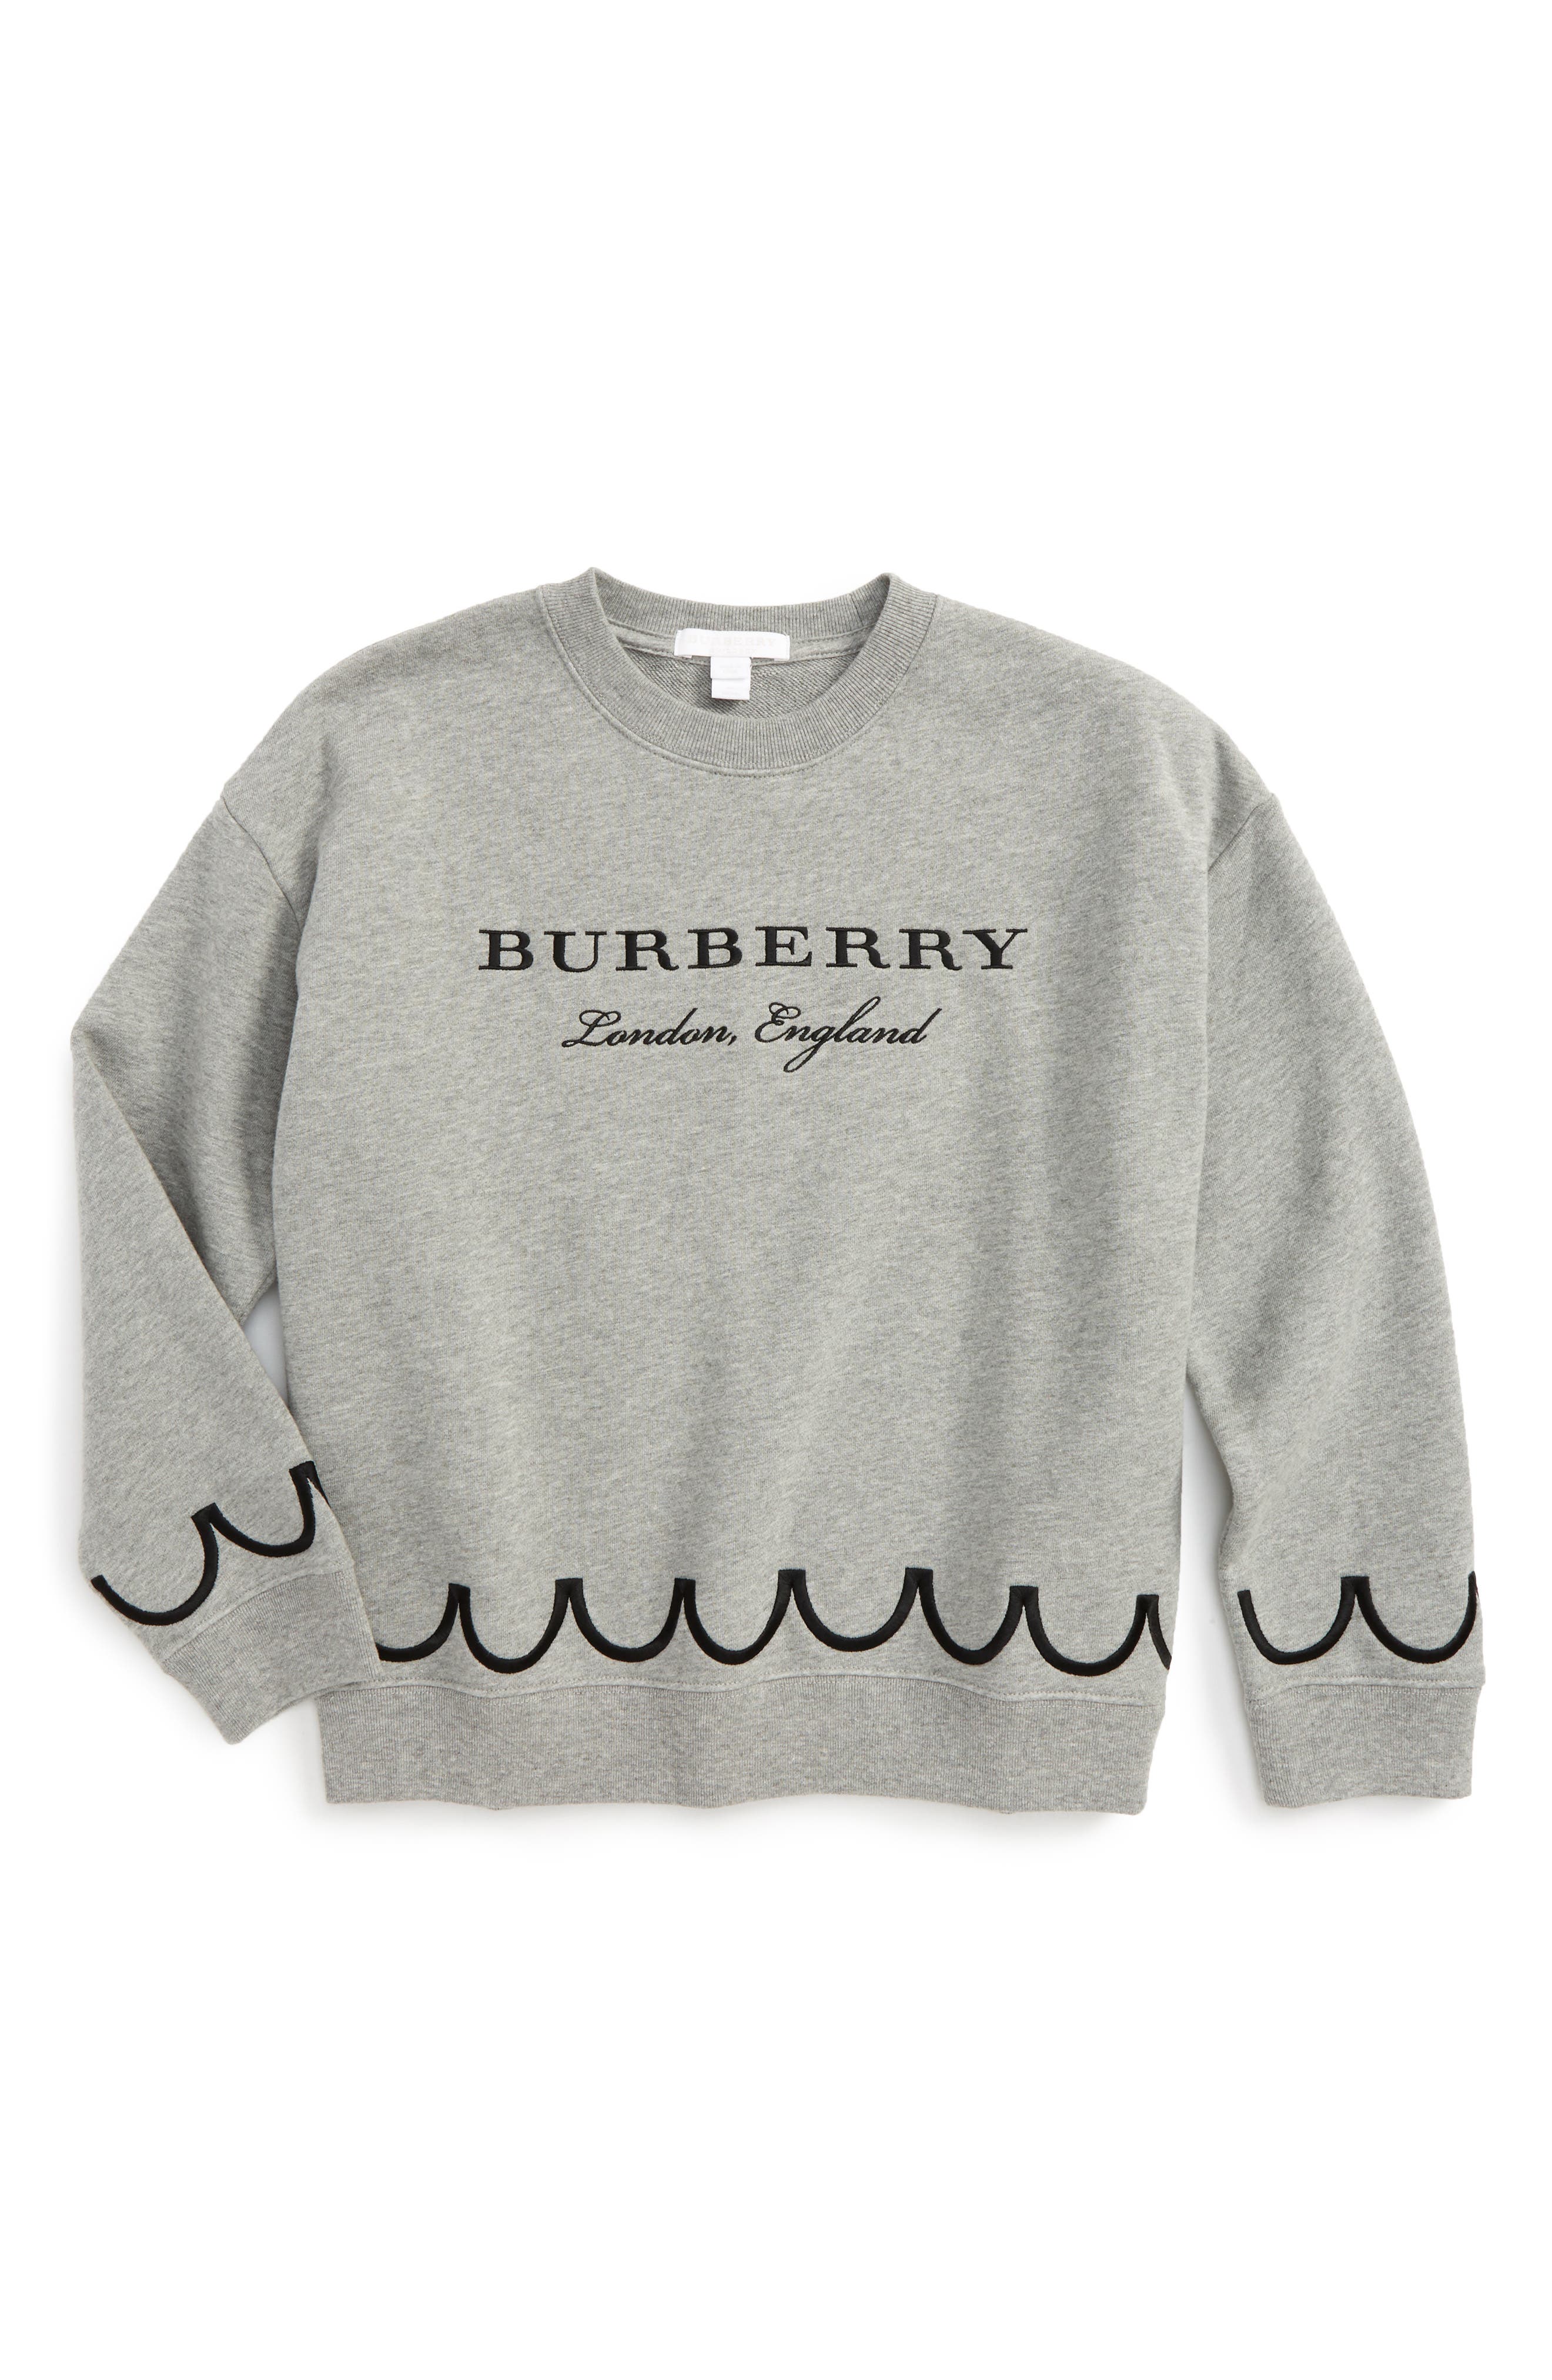 burberry toddler sweater